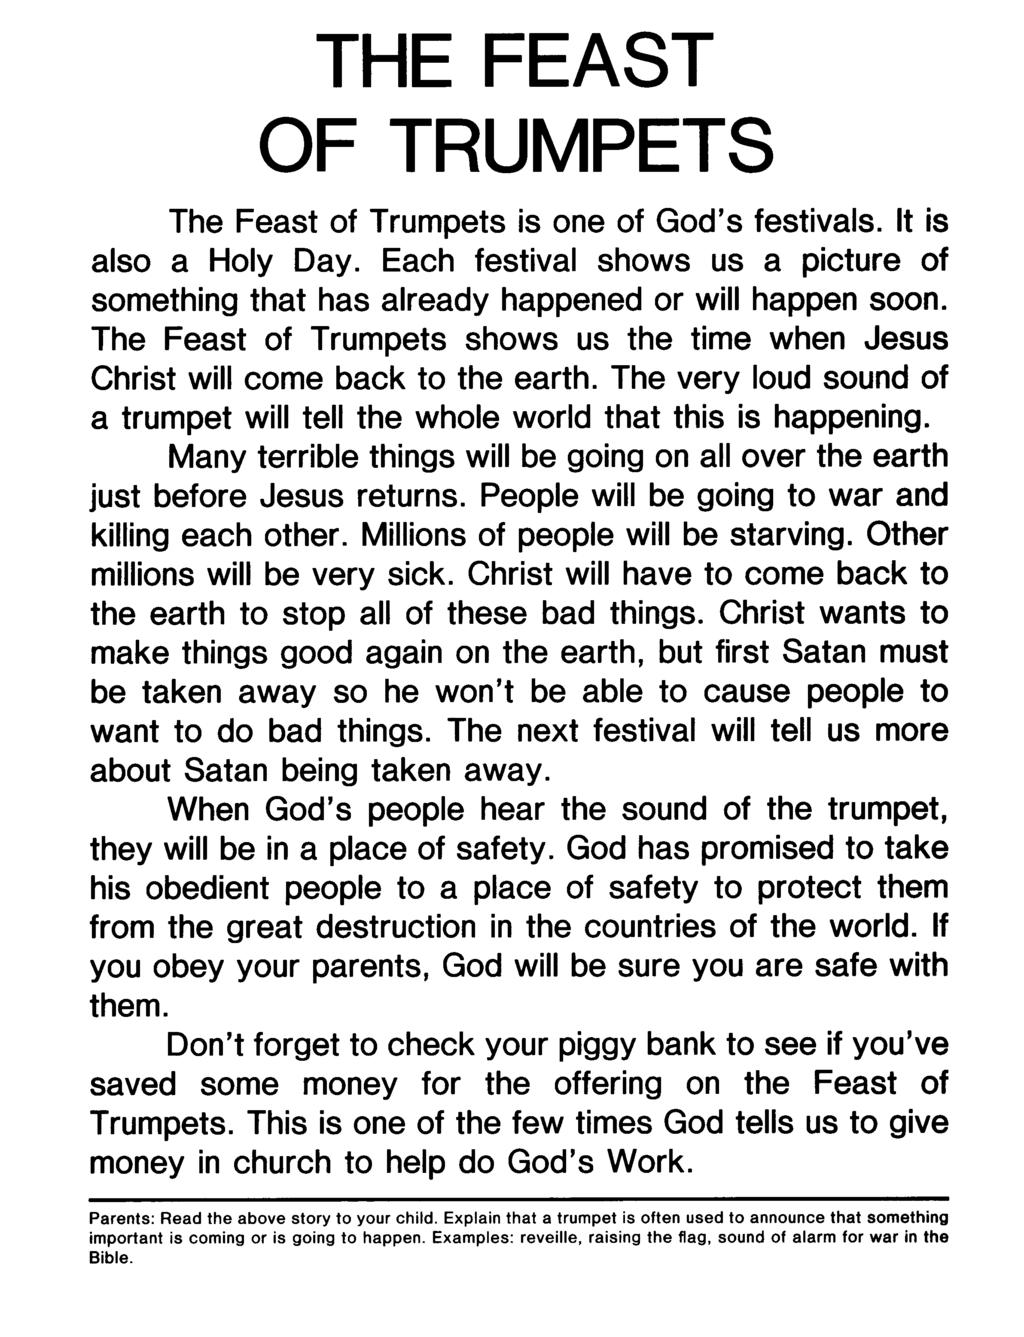 THE FEAST OF TRUMPETS The Feast of Trumpets is one of God's festivals. It is also a Holy Day. Each festival shows us a picture of something that has already happened or will happen soon.